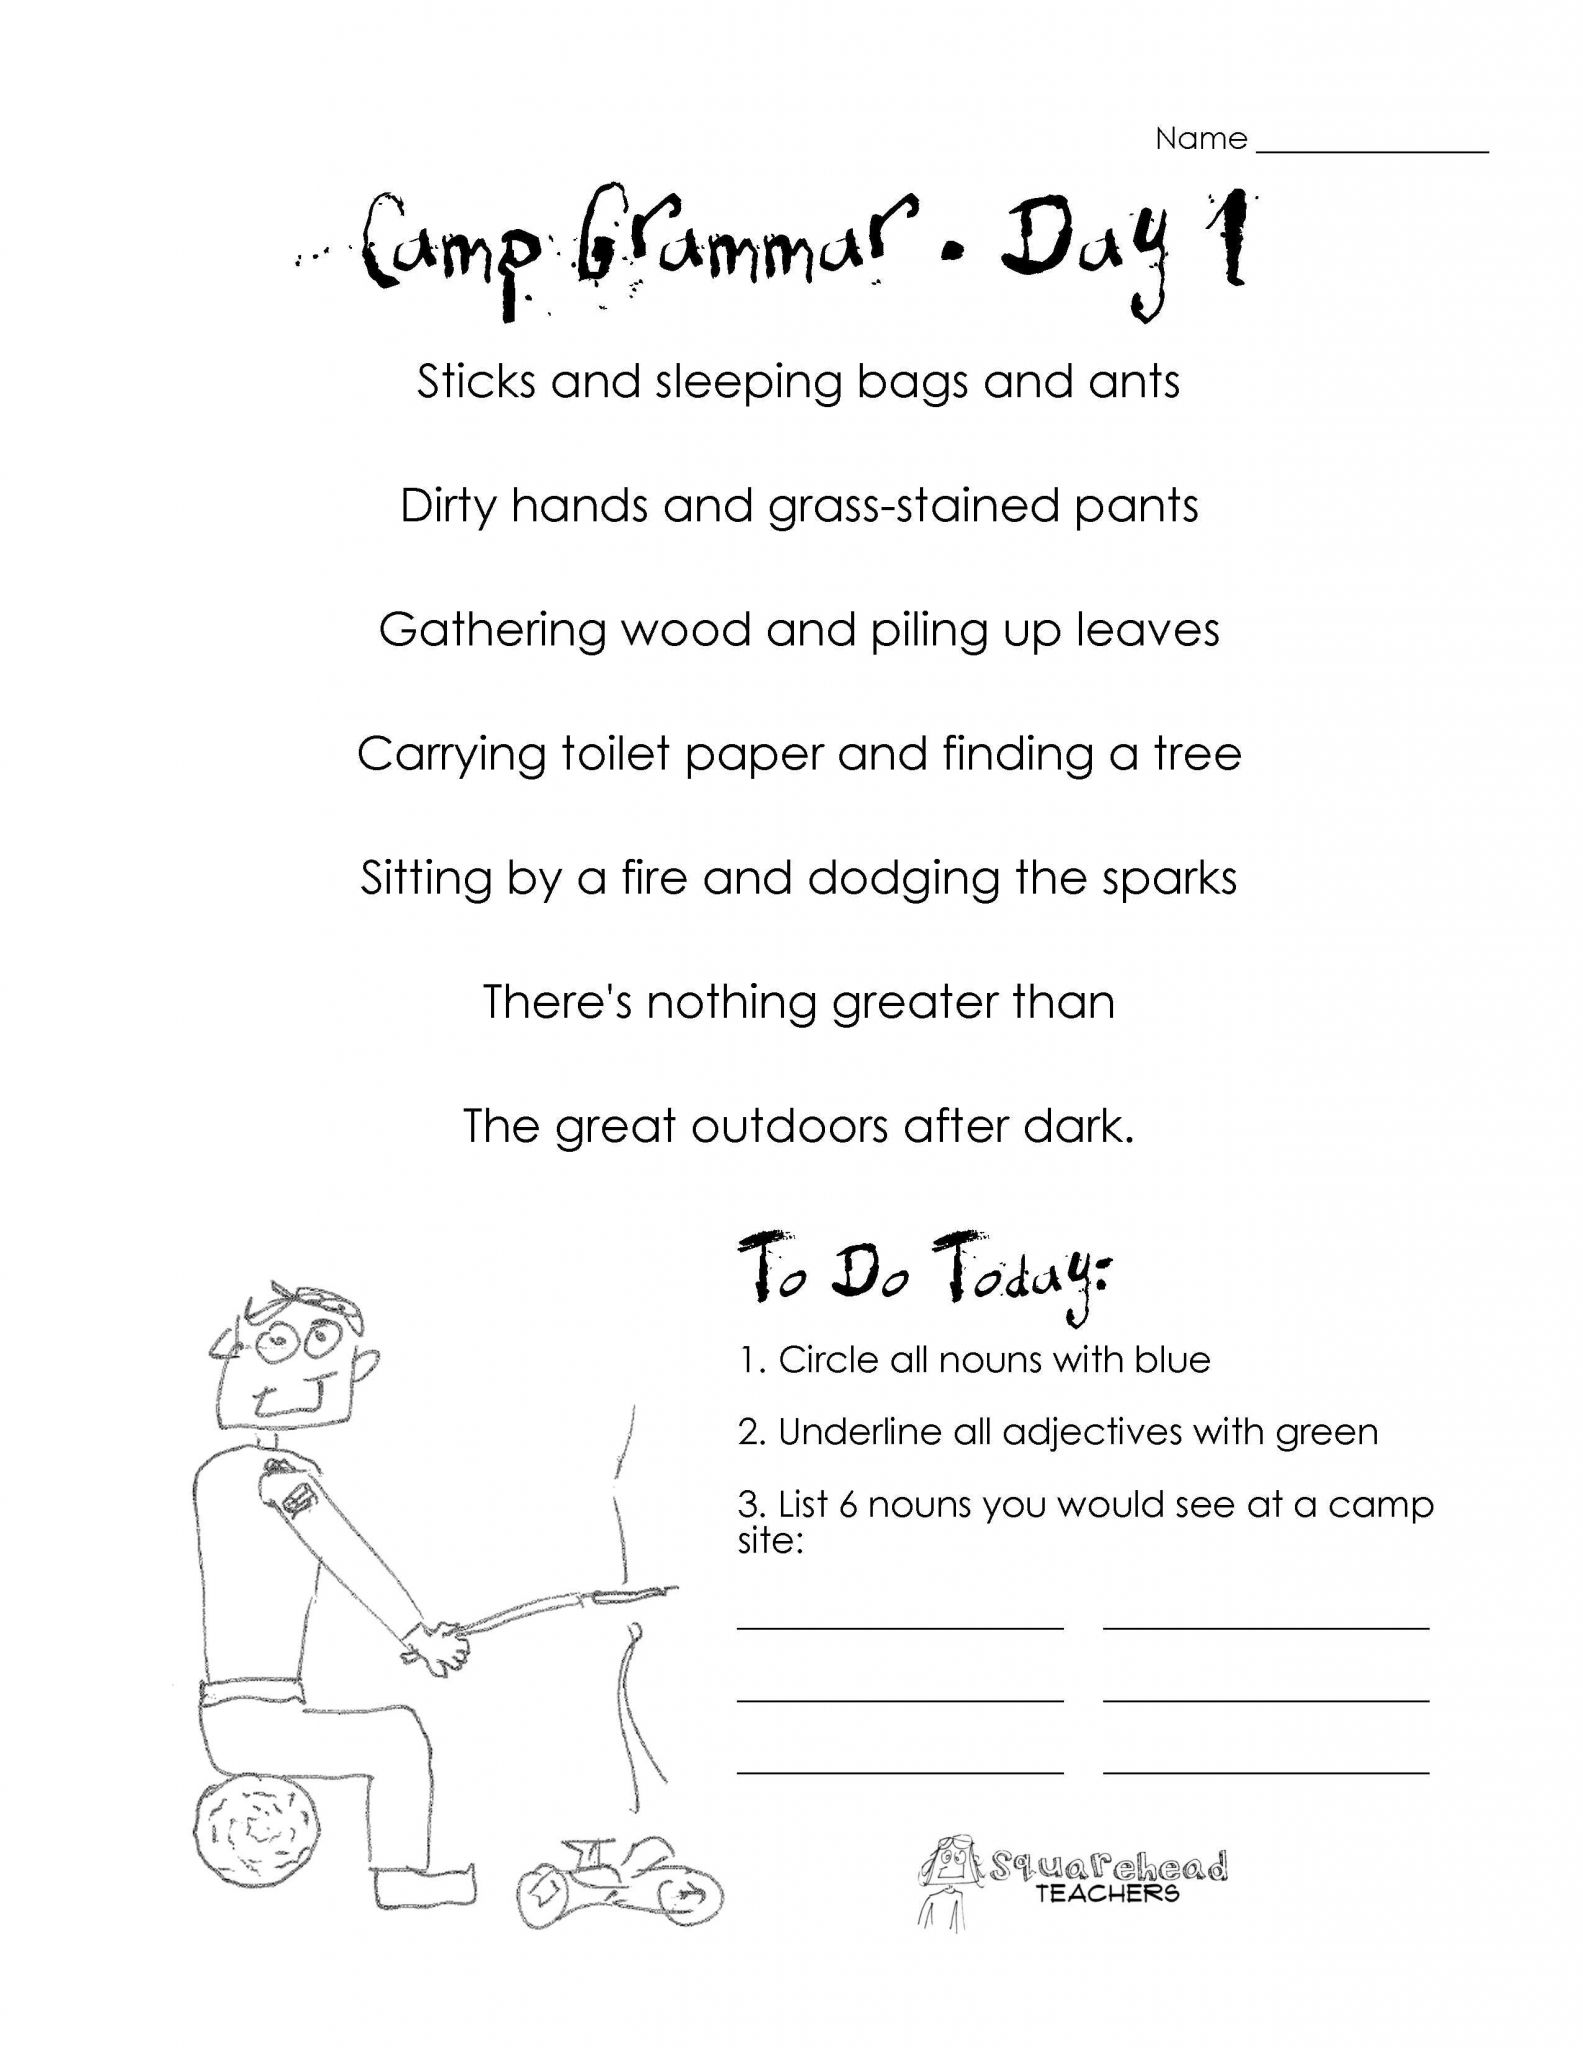 English Worksheets for Grade 1 Also Free Printable Spelling Worksheets for 4th Grade Unique 3rd Grade